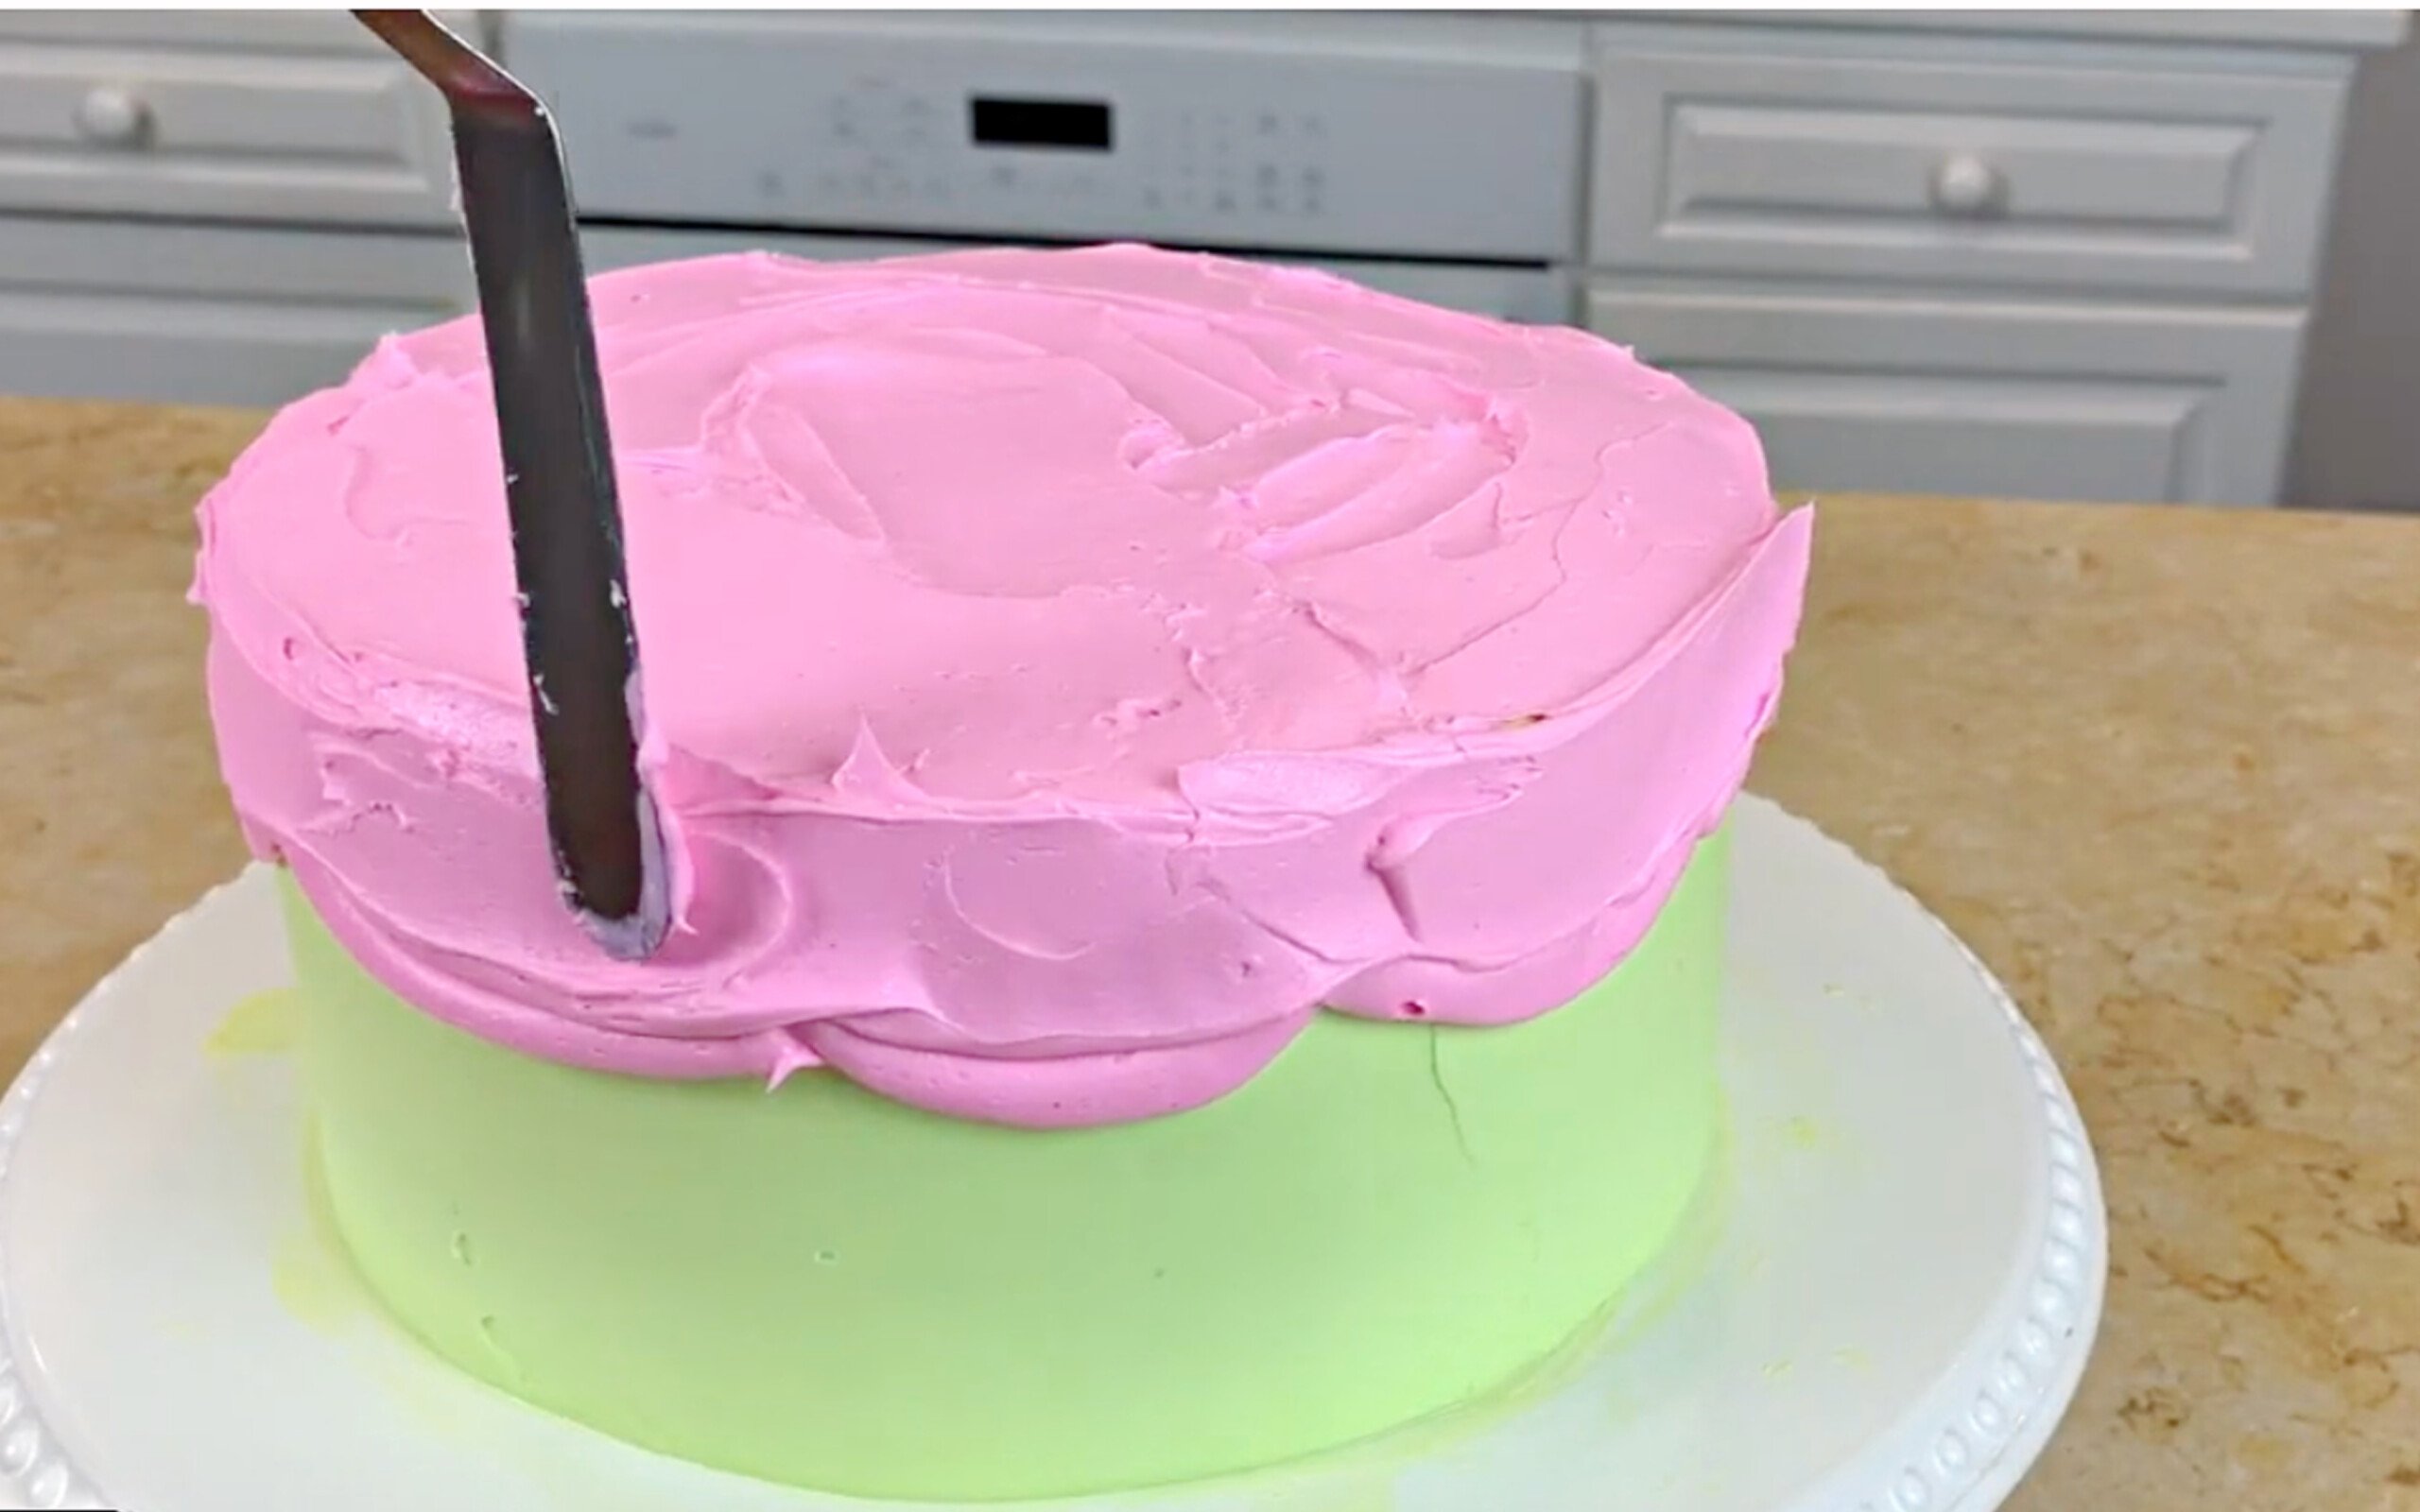 Smoothing the frosting on our buttercream cartoon cake.